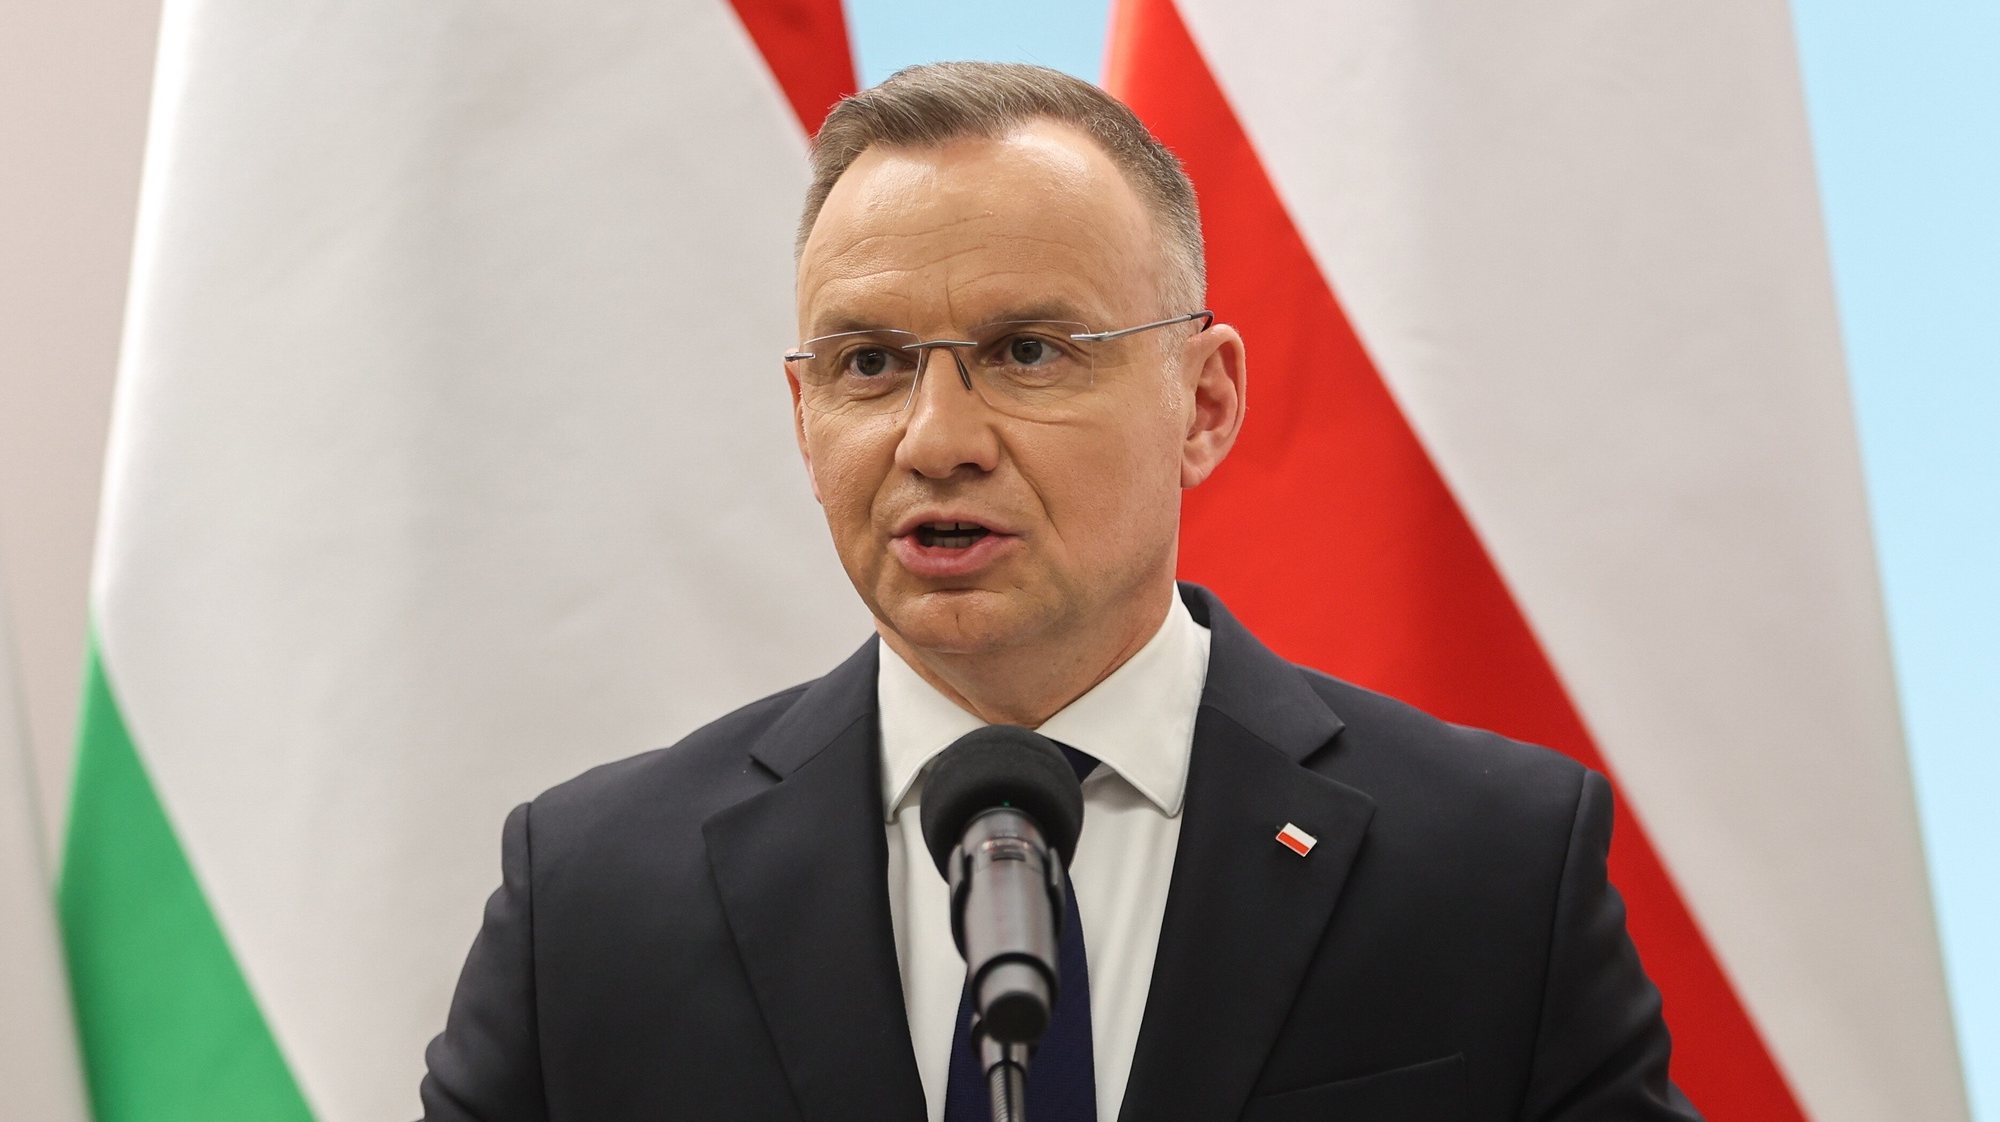 epa11236888 Polish President Andrzej Duda and Hungarian President Tamas Sulyok (not pictured) attend a press conference after their meeting at the Culture and Art Centre in Stary Sacz, southern Poland, 22 March 2024. Hungarian President Tamas Sulyok and his wife are paying a working visit to Poland on the occasion of Polish-Hungarian Friendship Day.  EPA/Leszek Szymanski POLAND OUT